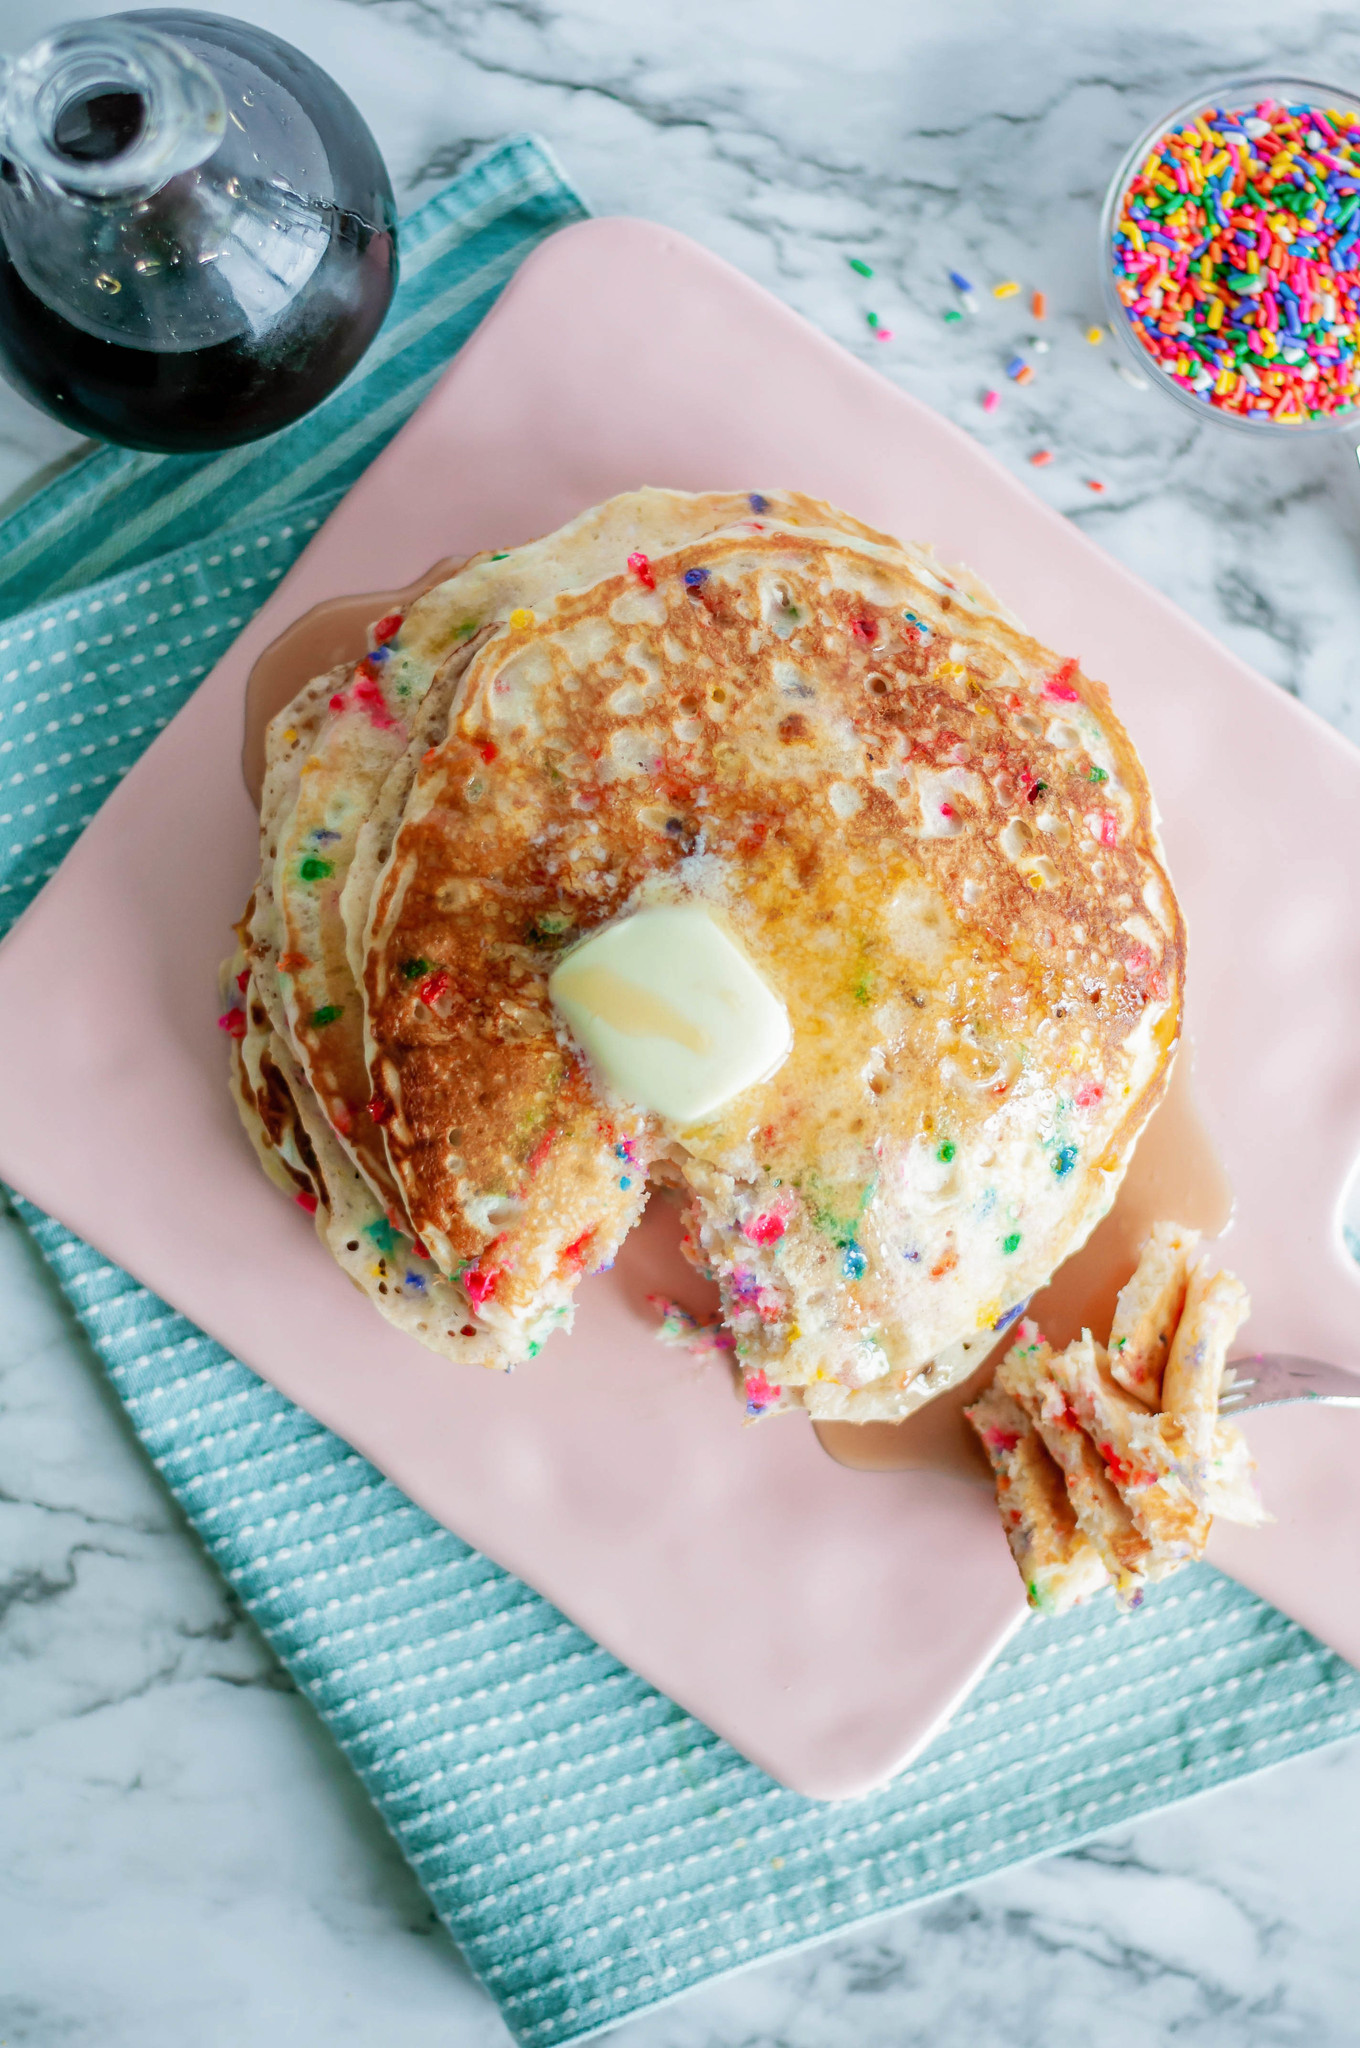 Funfetti Pancakes are a fun way to celebrate something special or brighten that Monday mood. Packed full of sprinkles and cake batter goodness.